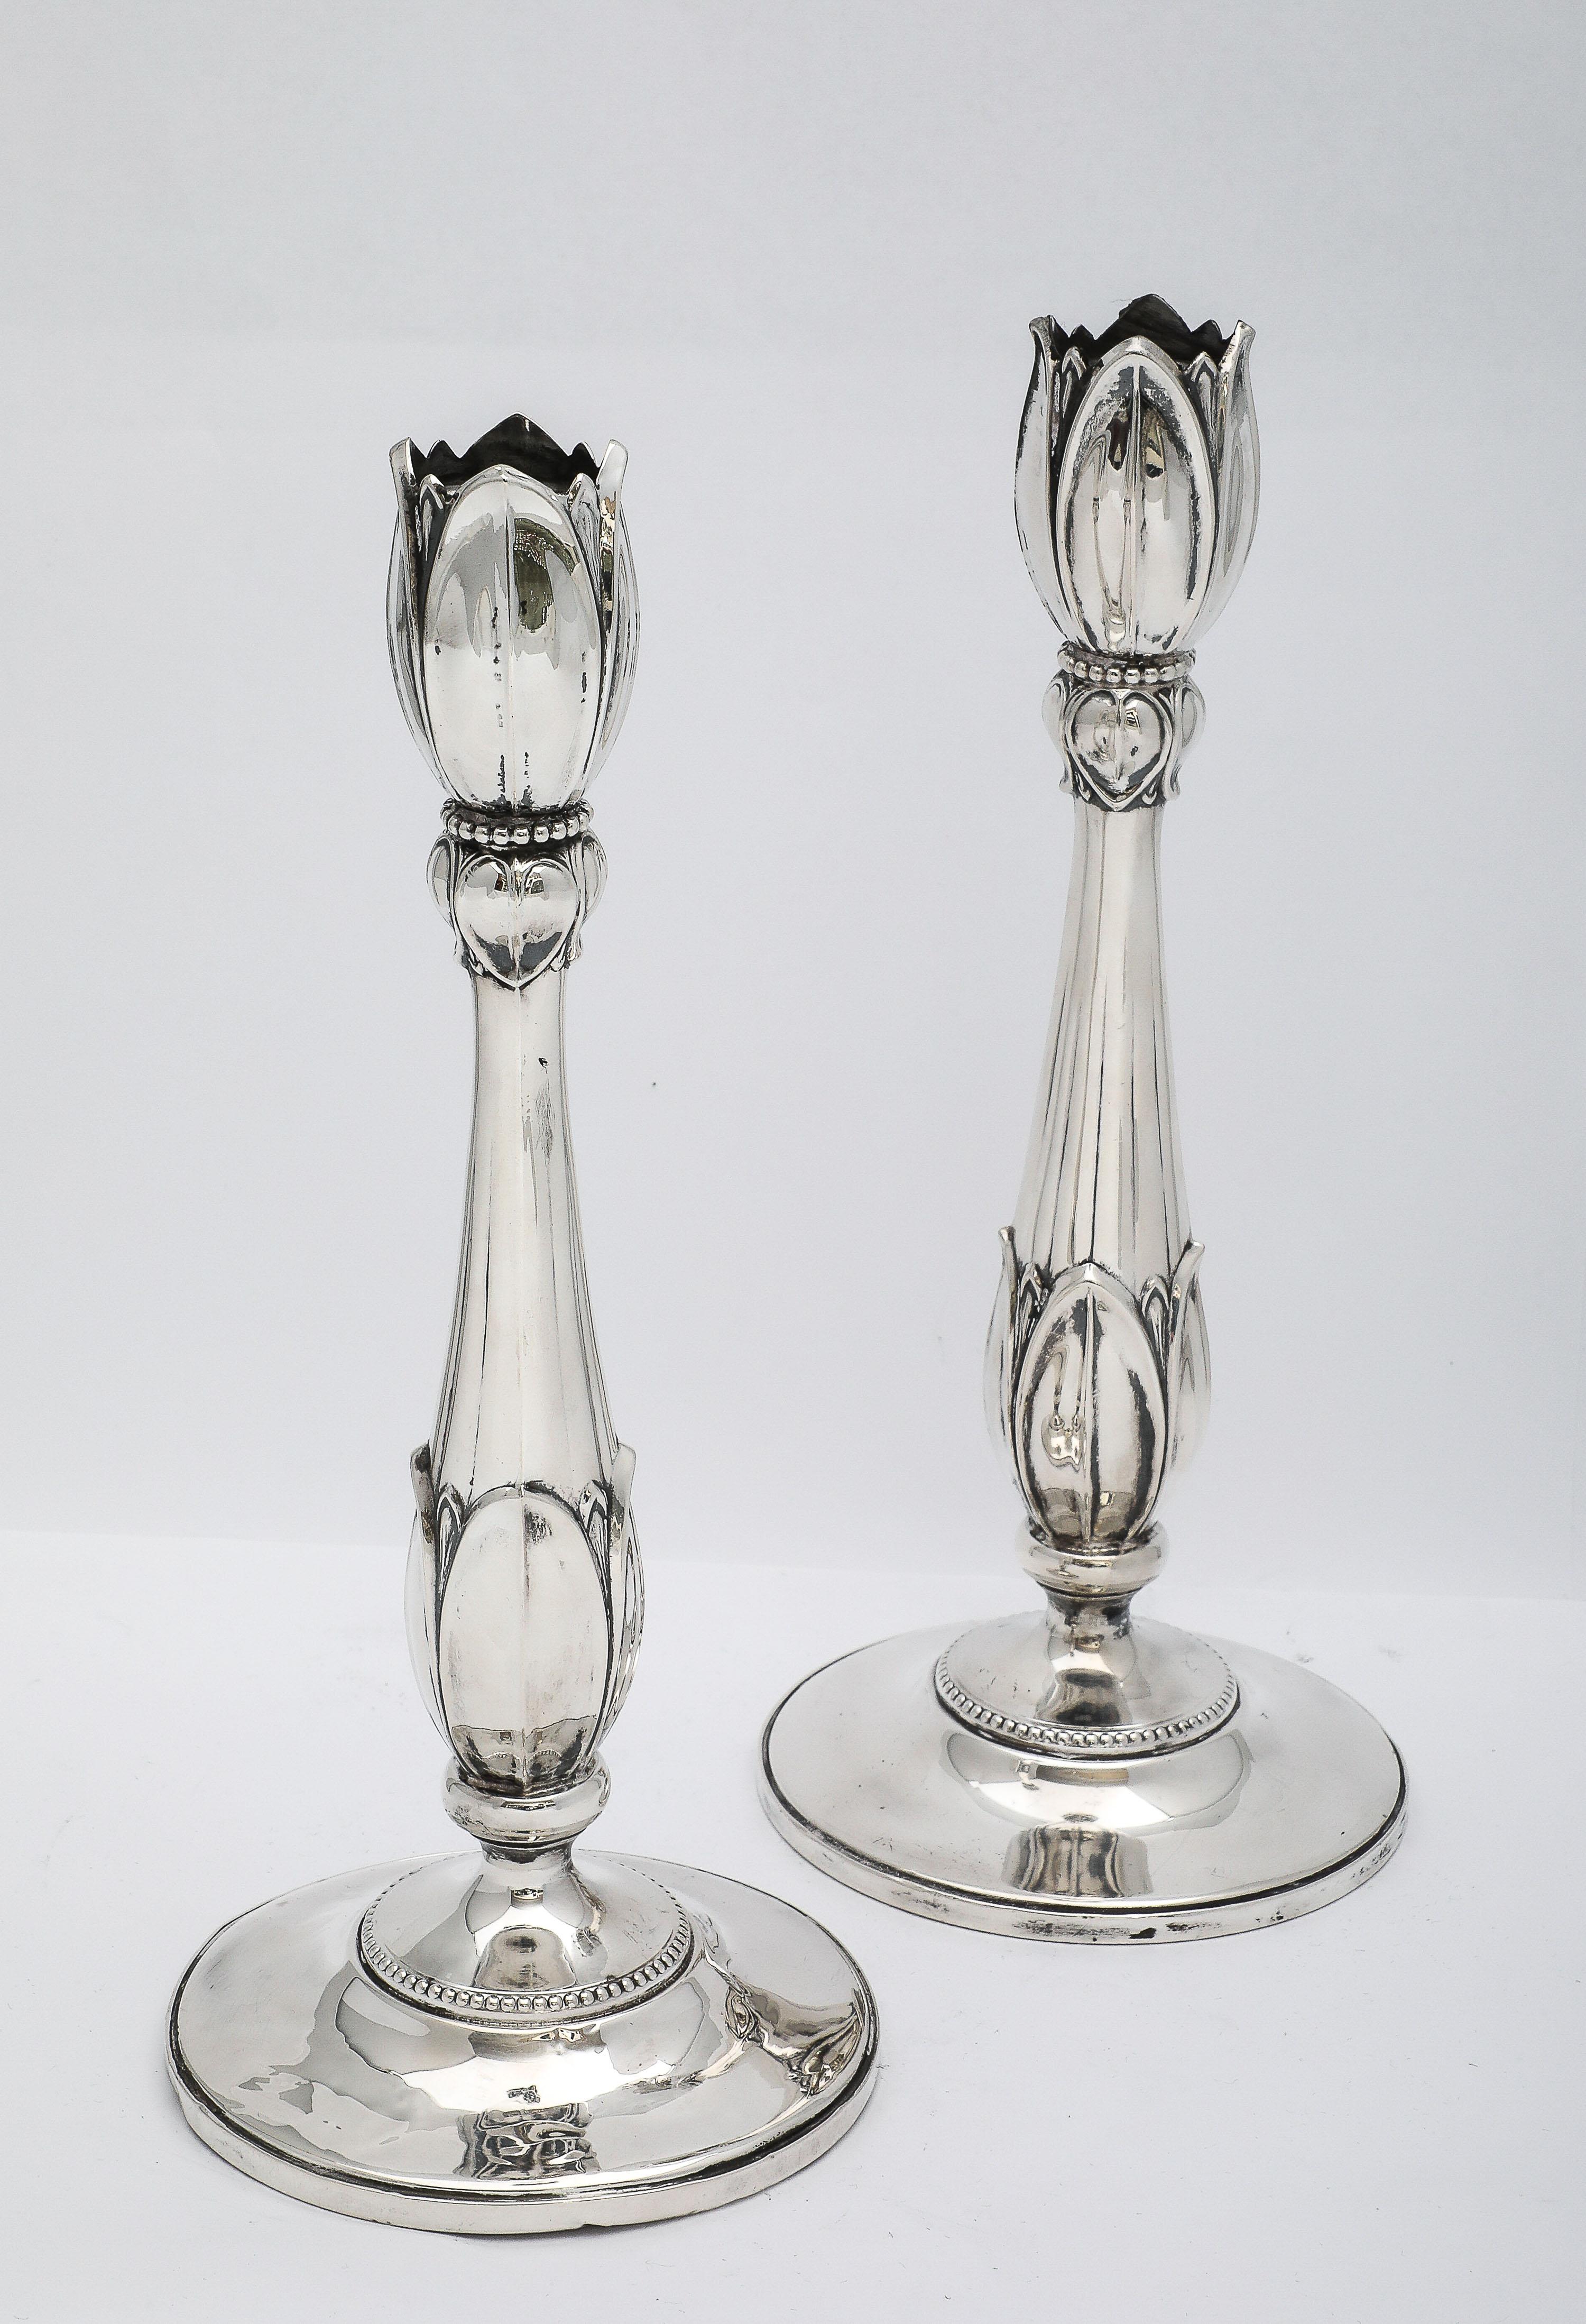 Rare Pair of Tall Sterling Silver Art Nouveau-Style Flower-Form Candlesticks For Sale 11